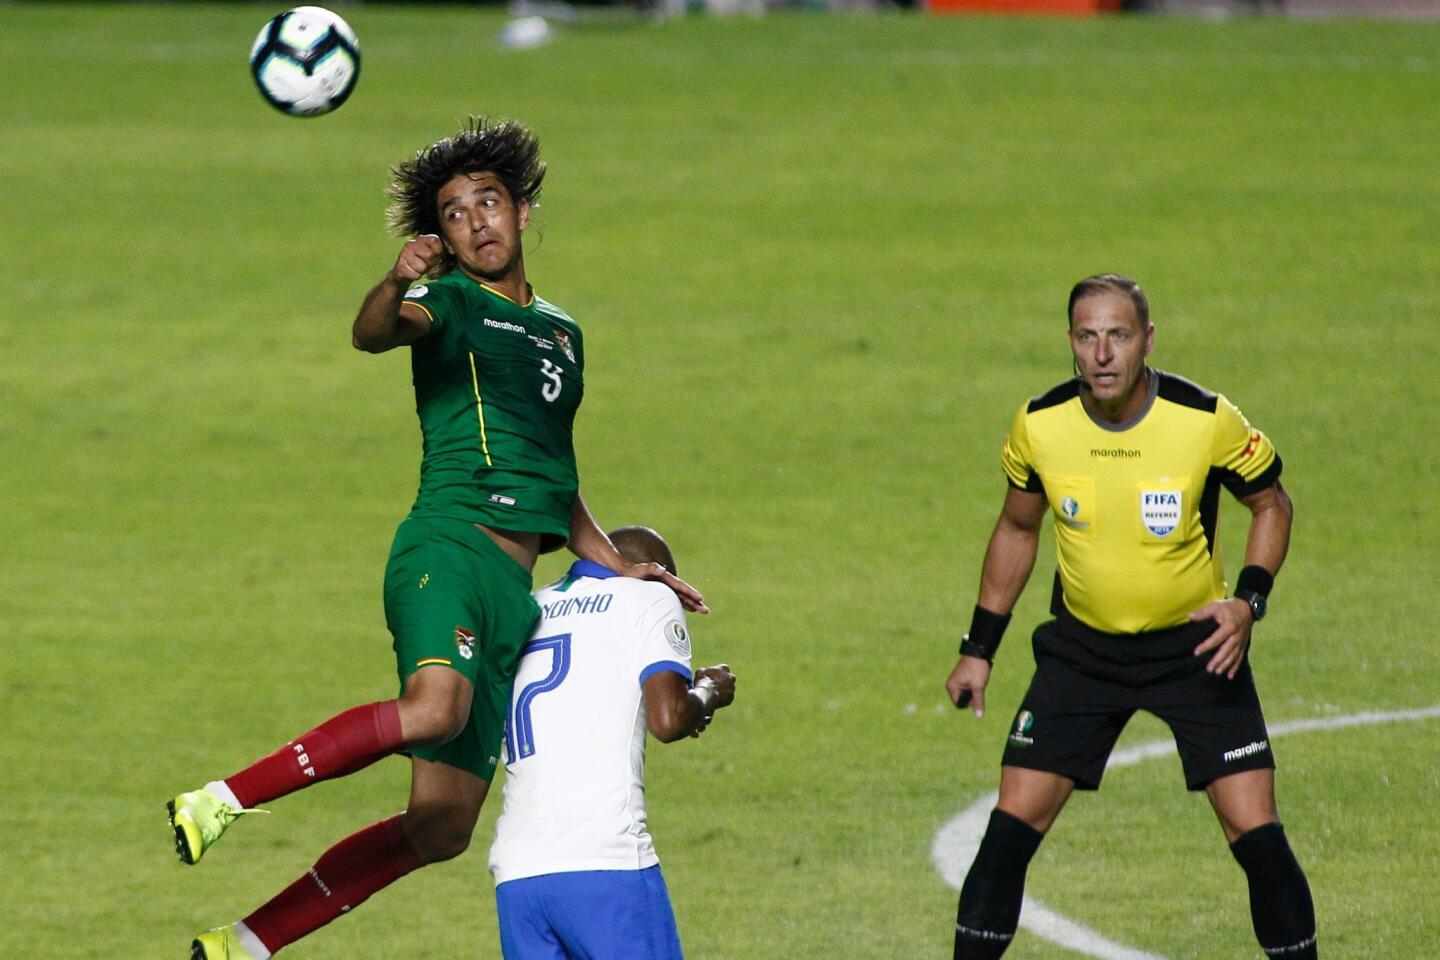 Bolivia's Marcelo Martins (L) jumps over Brazil's Fernandinho as Argentine referee Nestor Pitana looks on during their Copa America football tournament group match at the Cicero Pompeu de Toledo Stadium, also known as Morumbi, in Sao Paulo, Brazil, on June 14, 2019.